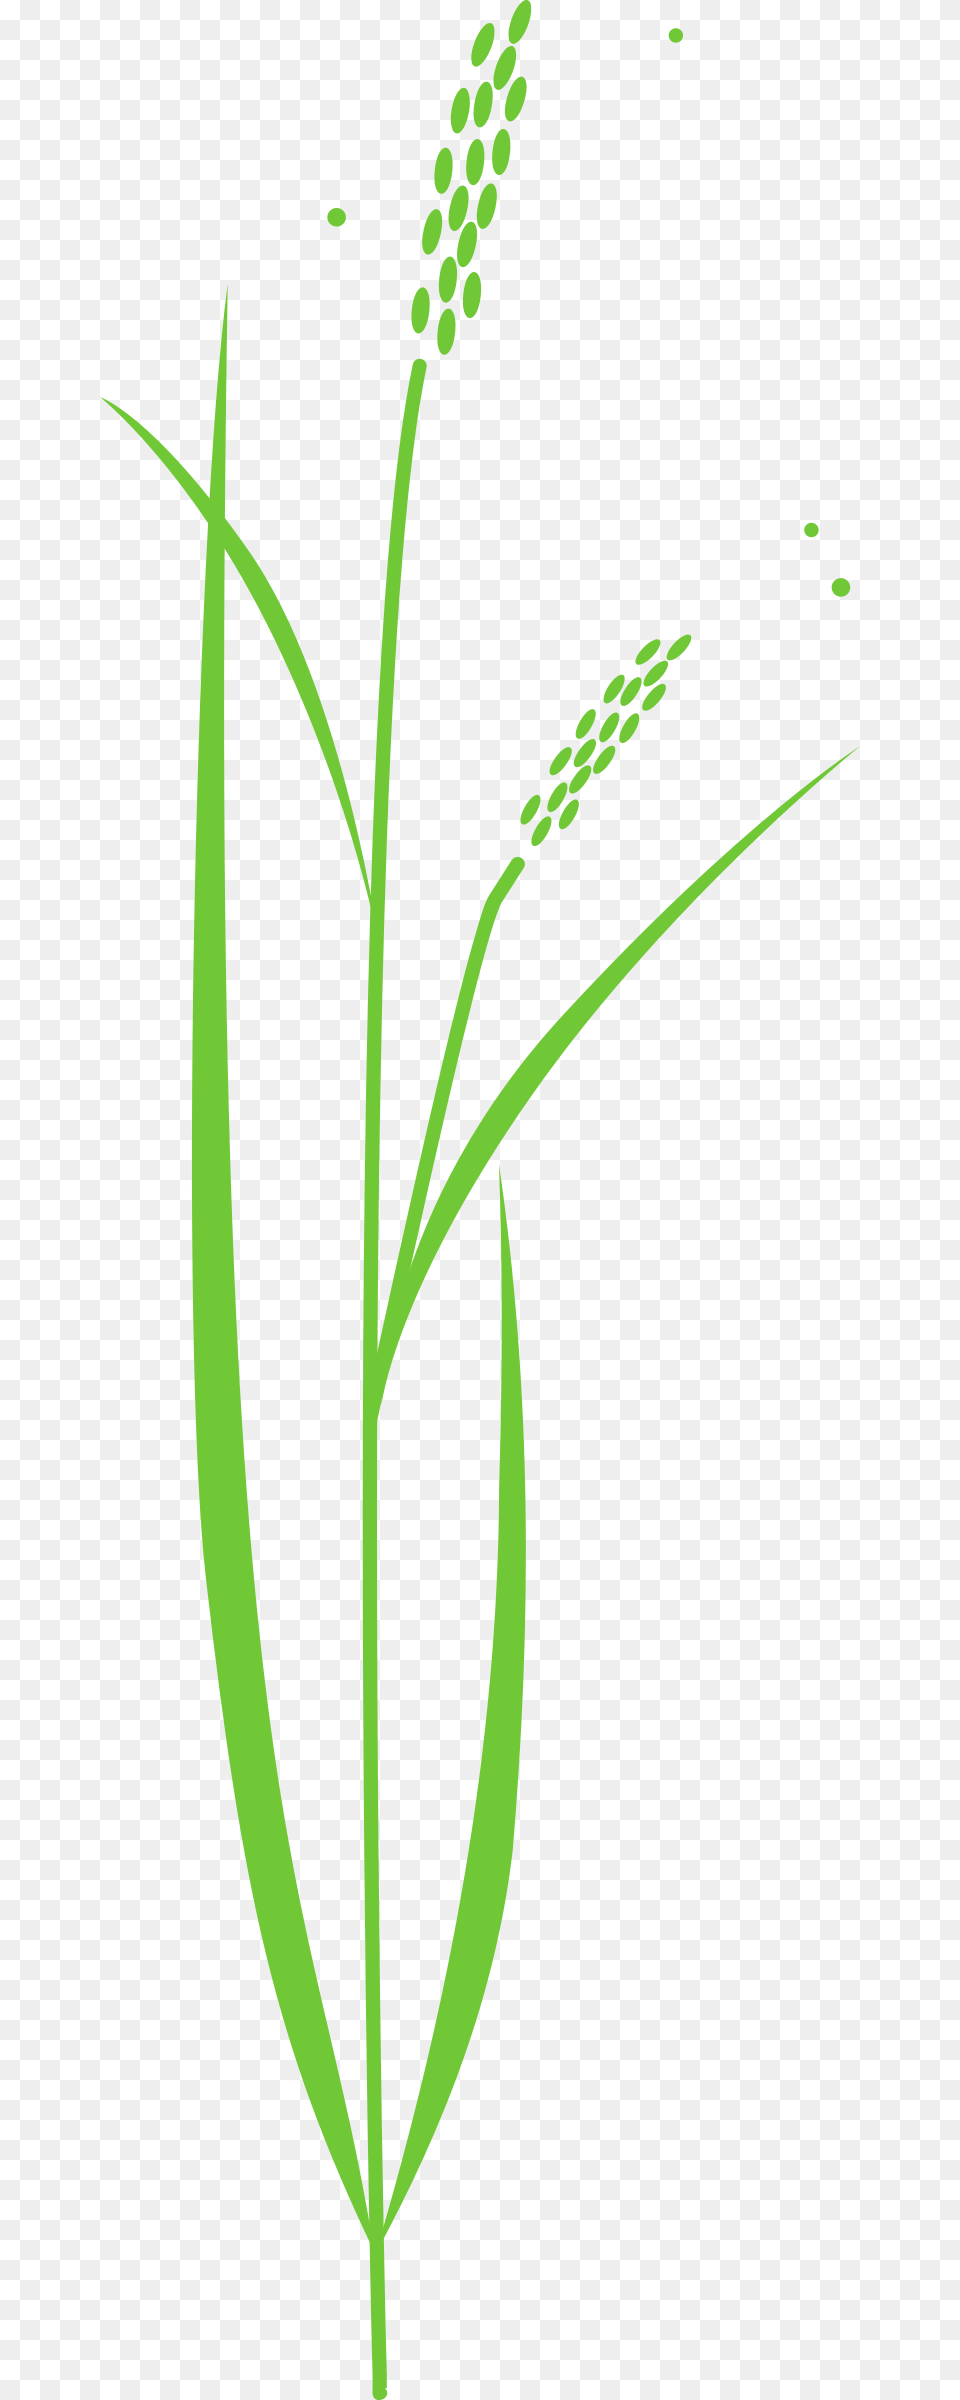 Transparent Plant Clip Art Rice Plant Free Clipart, Grass, Green, Flower, Agropyron Png